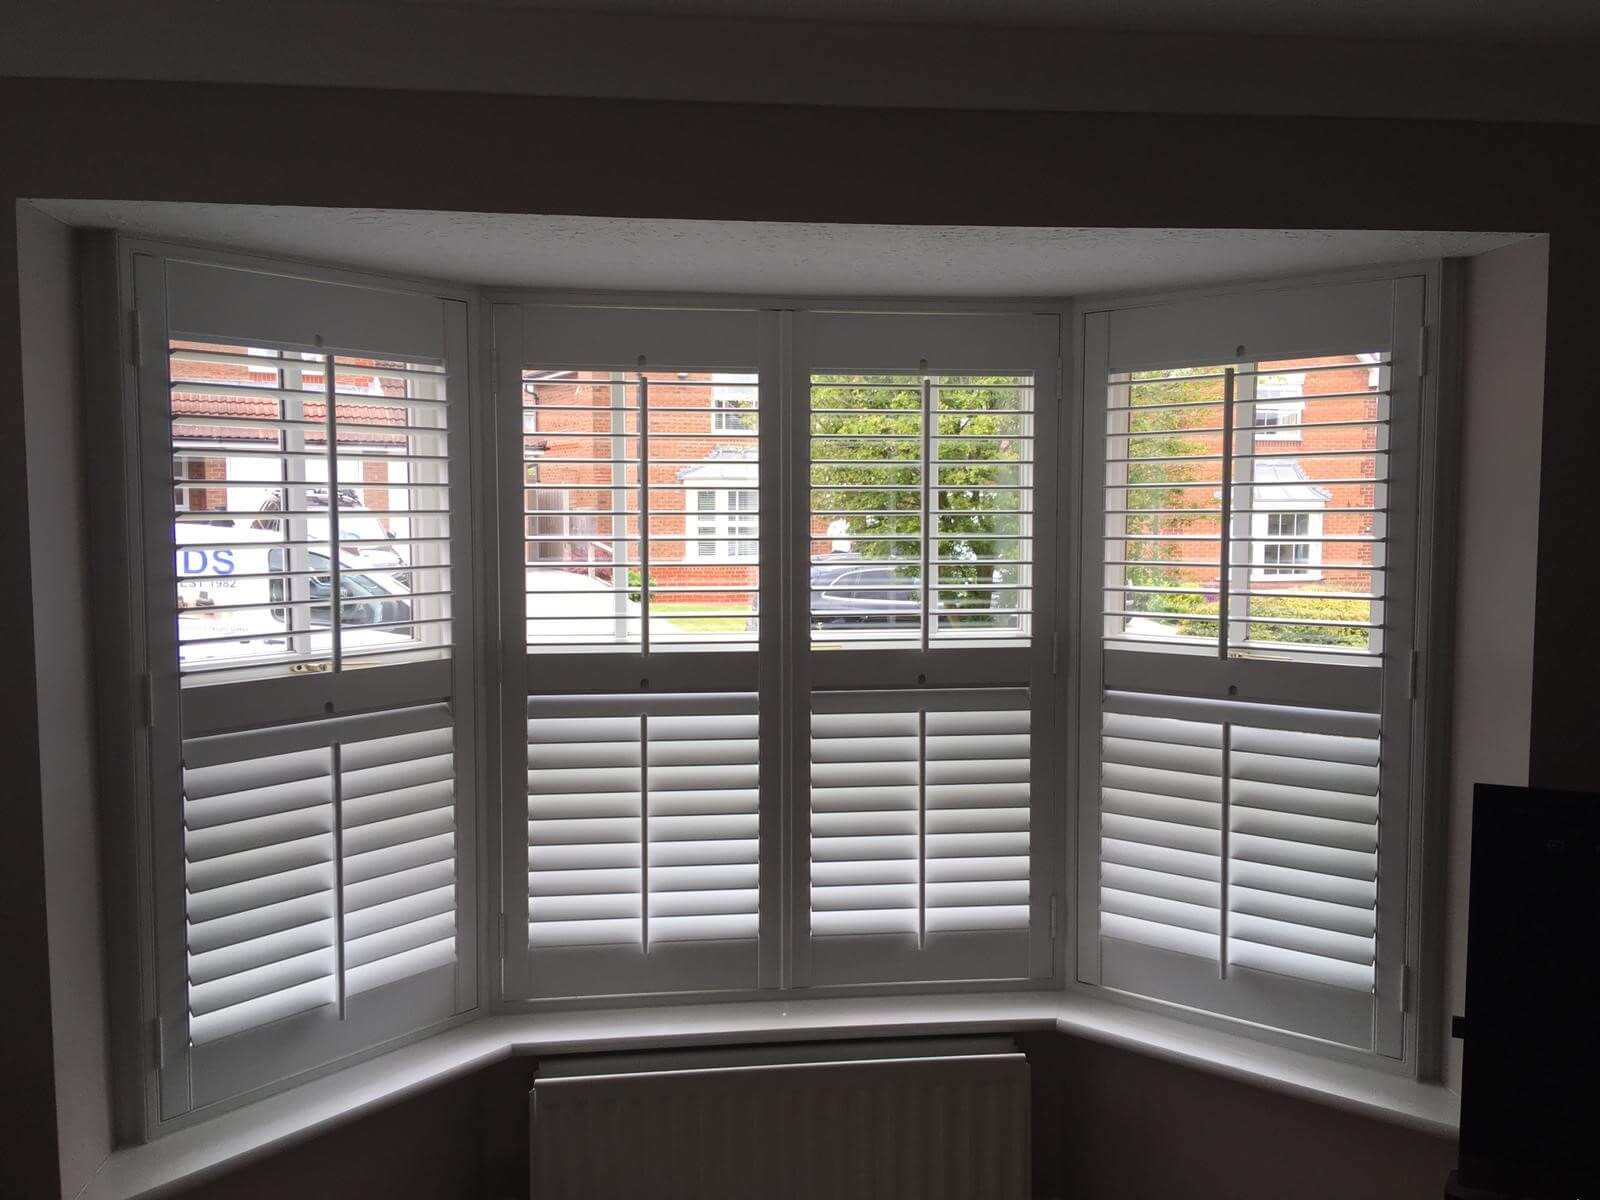 UK Specialists of Waterproof Plantation Shutters For Bathrooms